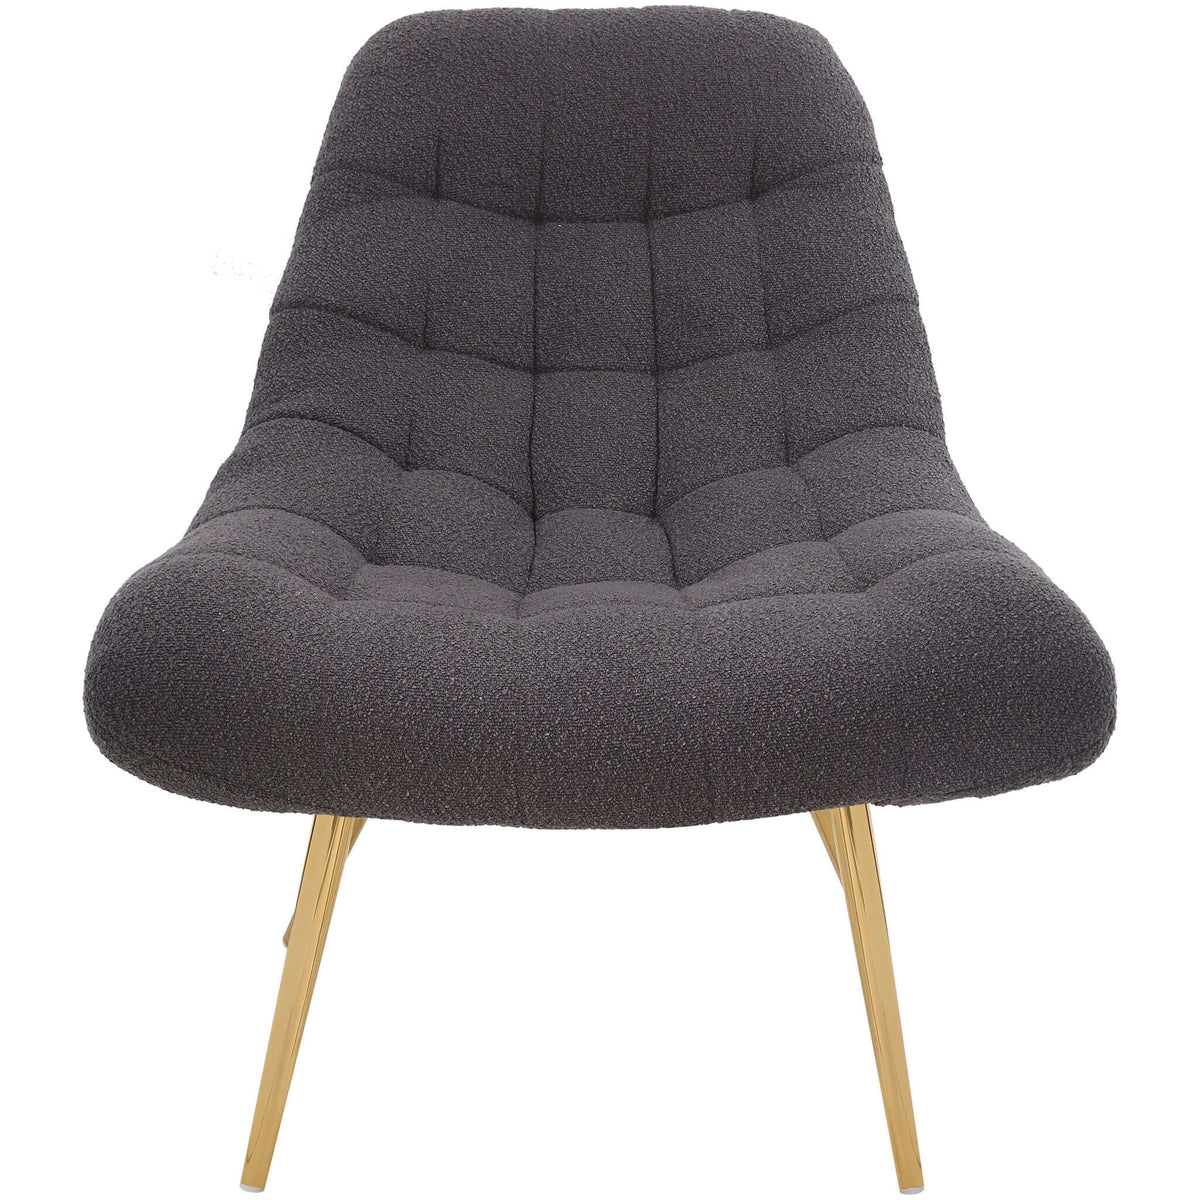 Aubrey French Boucle Lounge Chair